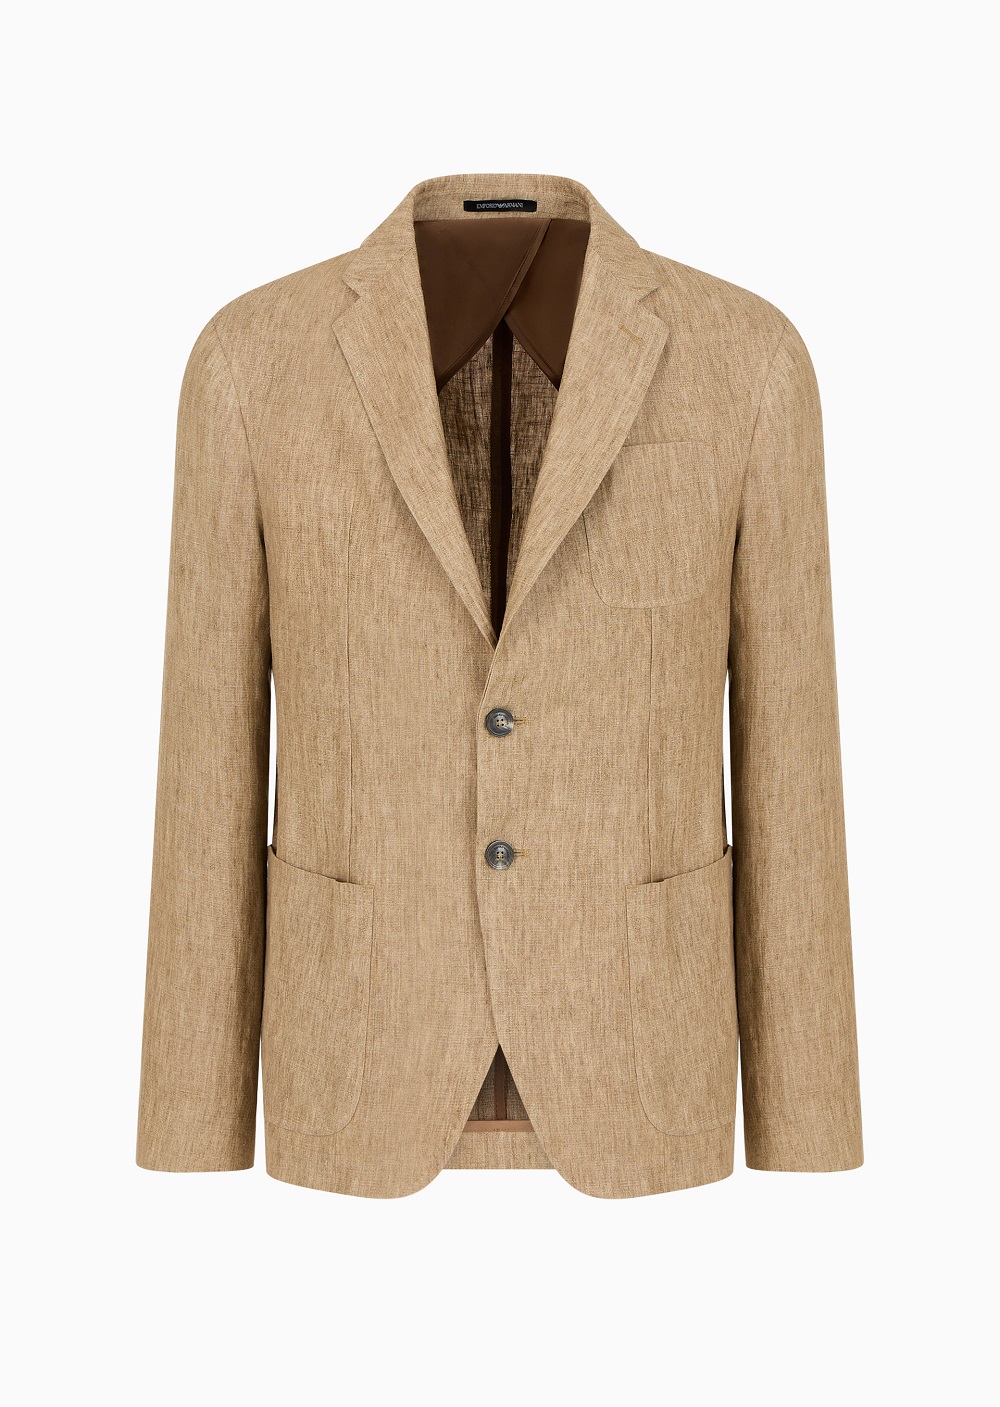 Emporio Armani Single-breasted jacket in faded linen with a crêp